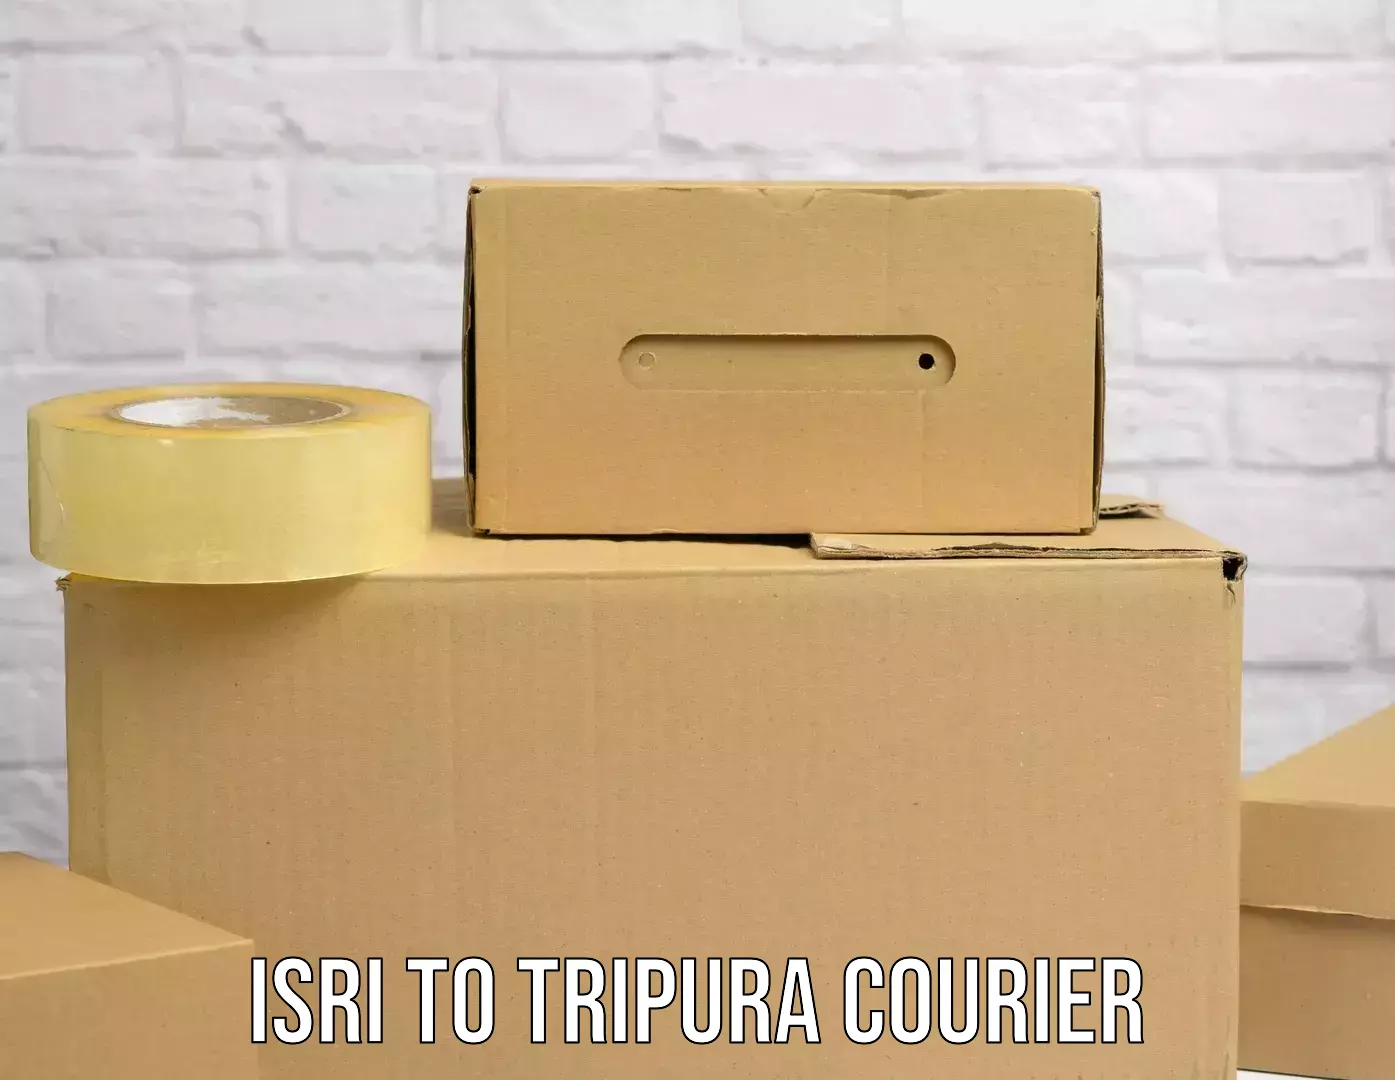 Advanced parcel tracking in Isri to Tripura